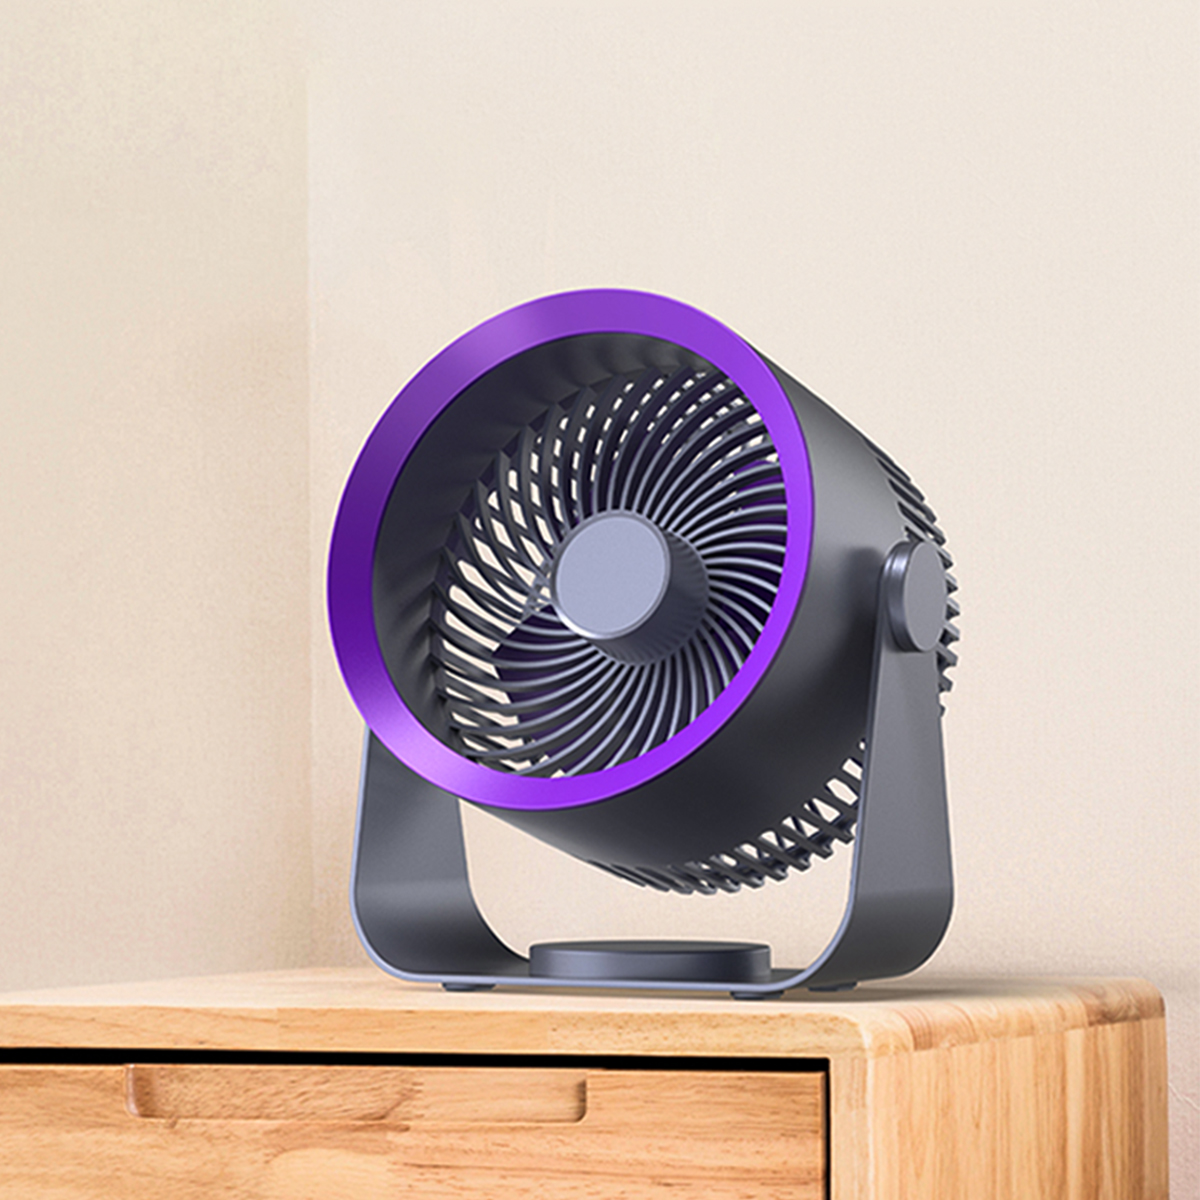 Cool Comfort with Style: The Portable Desk Fan Taking the B2B Market by Storm